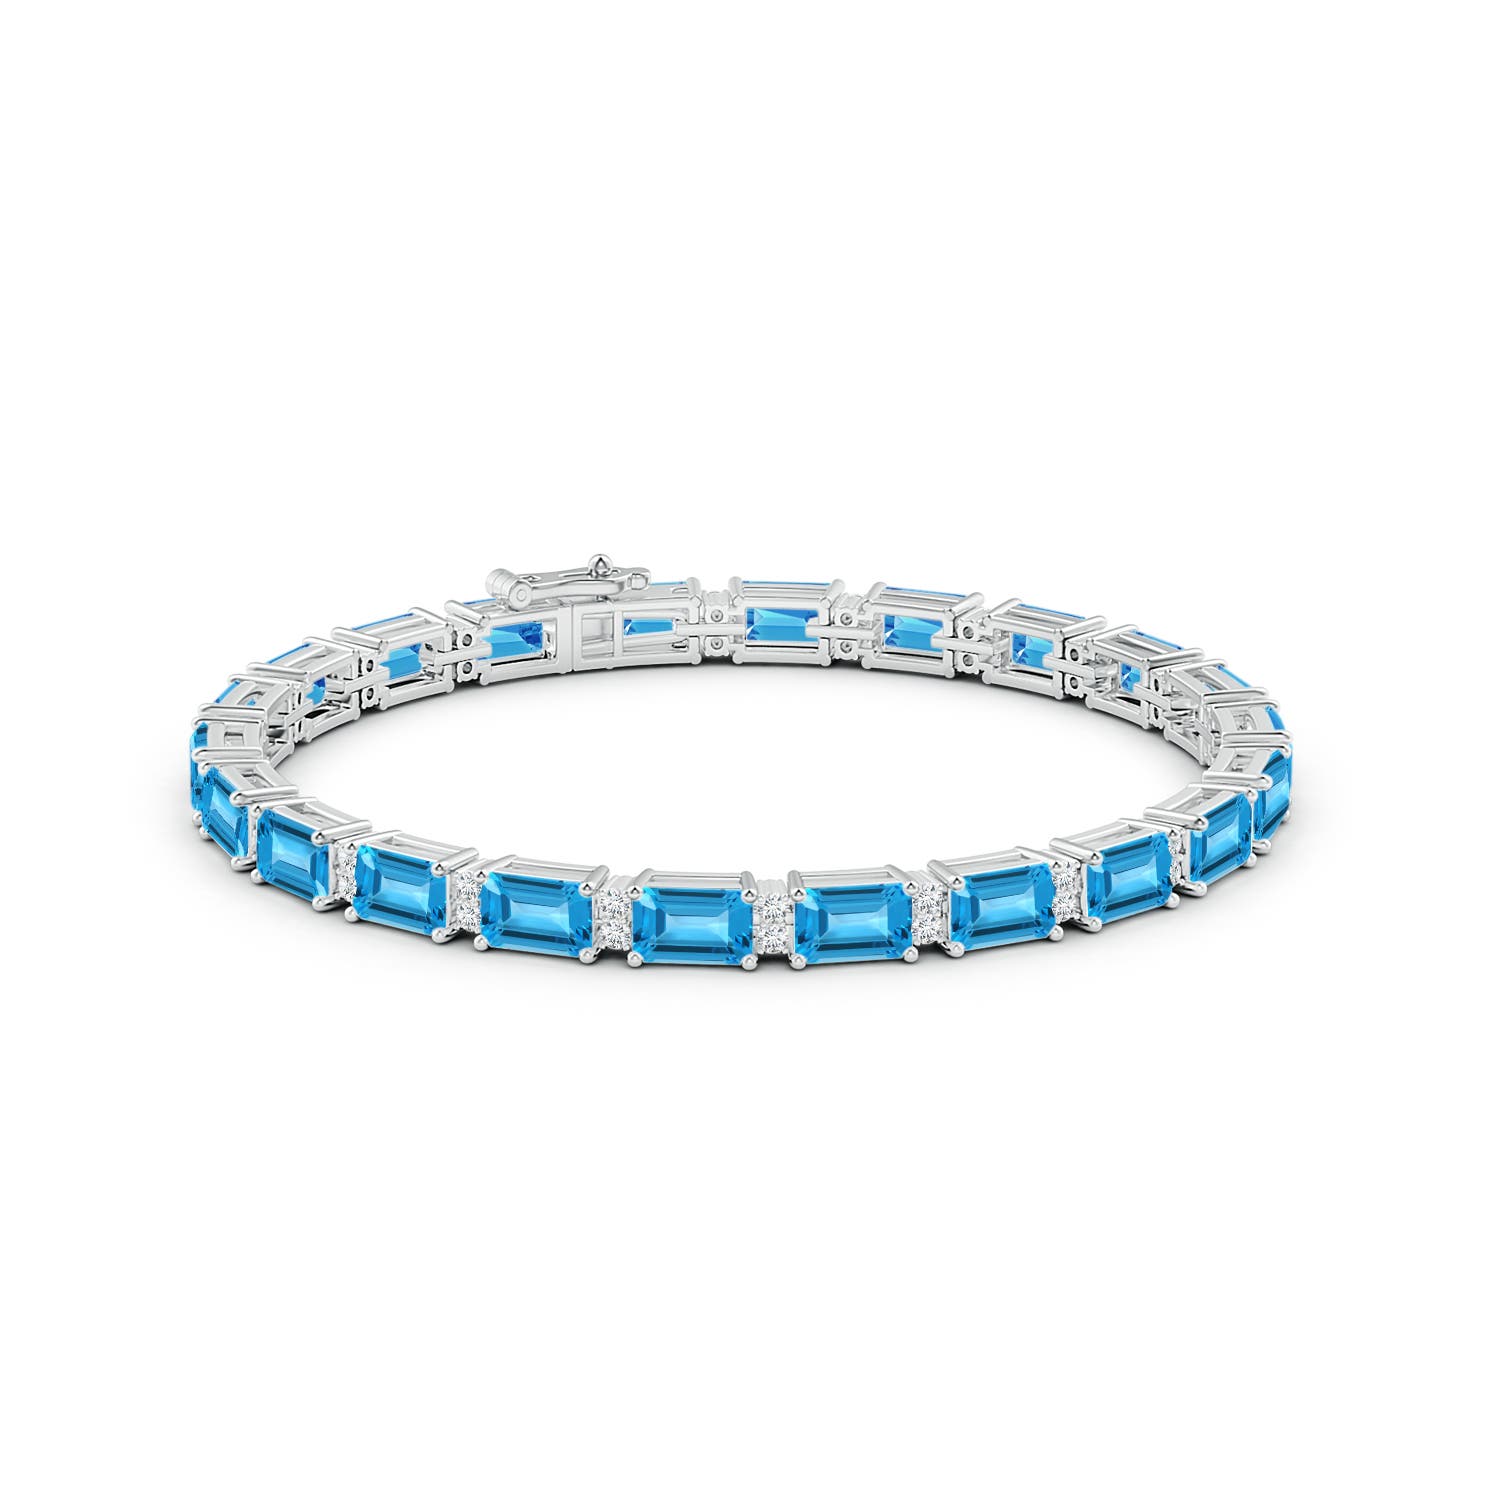 Blue Topaz Bracelet with larimar and silver by marahlago